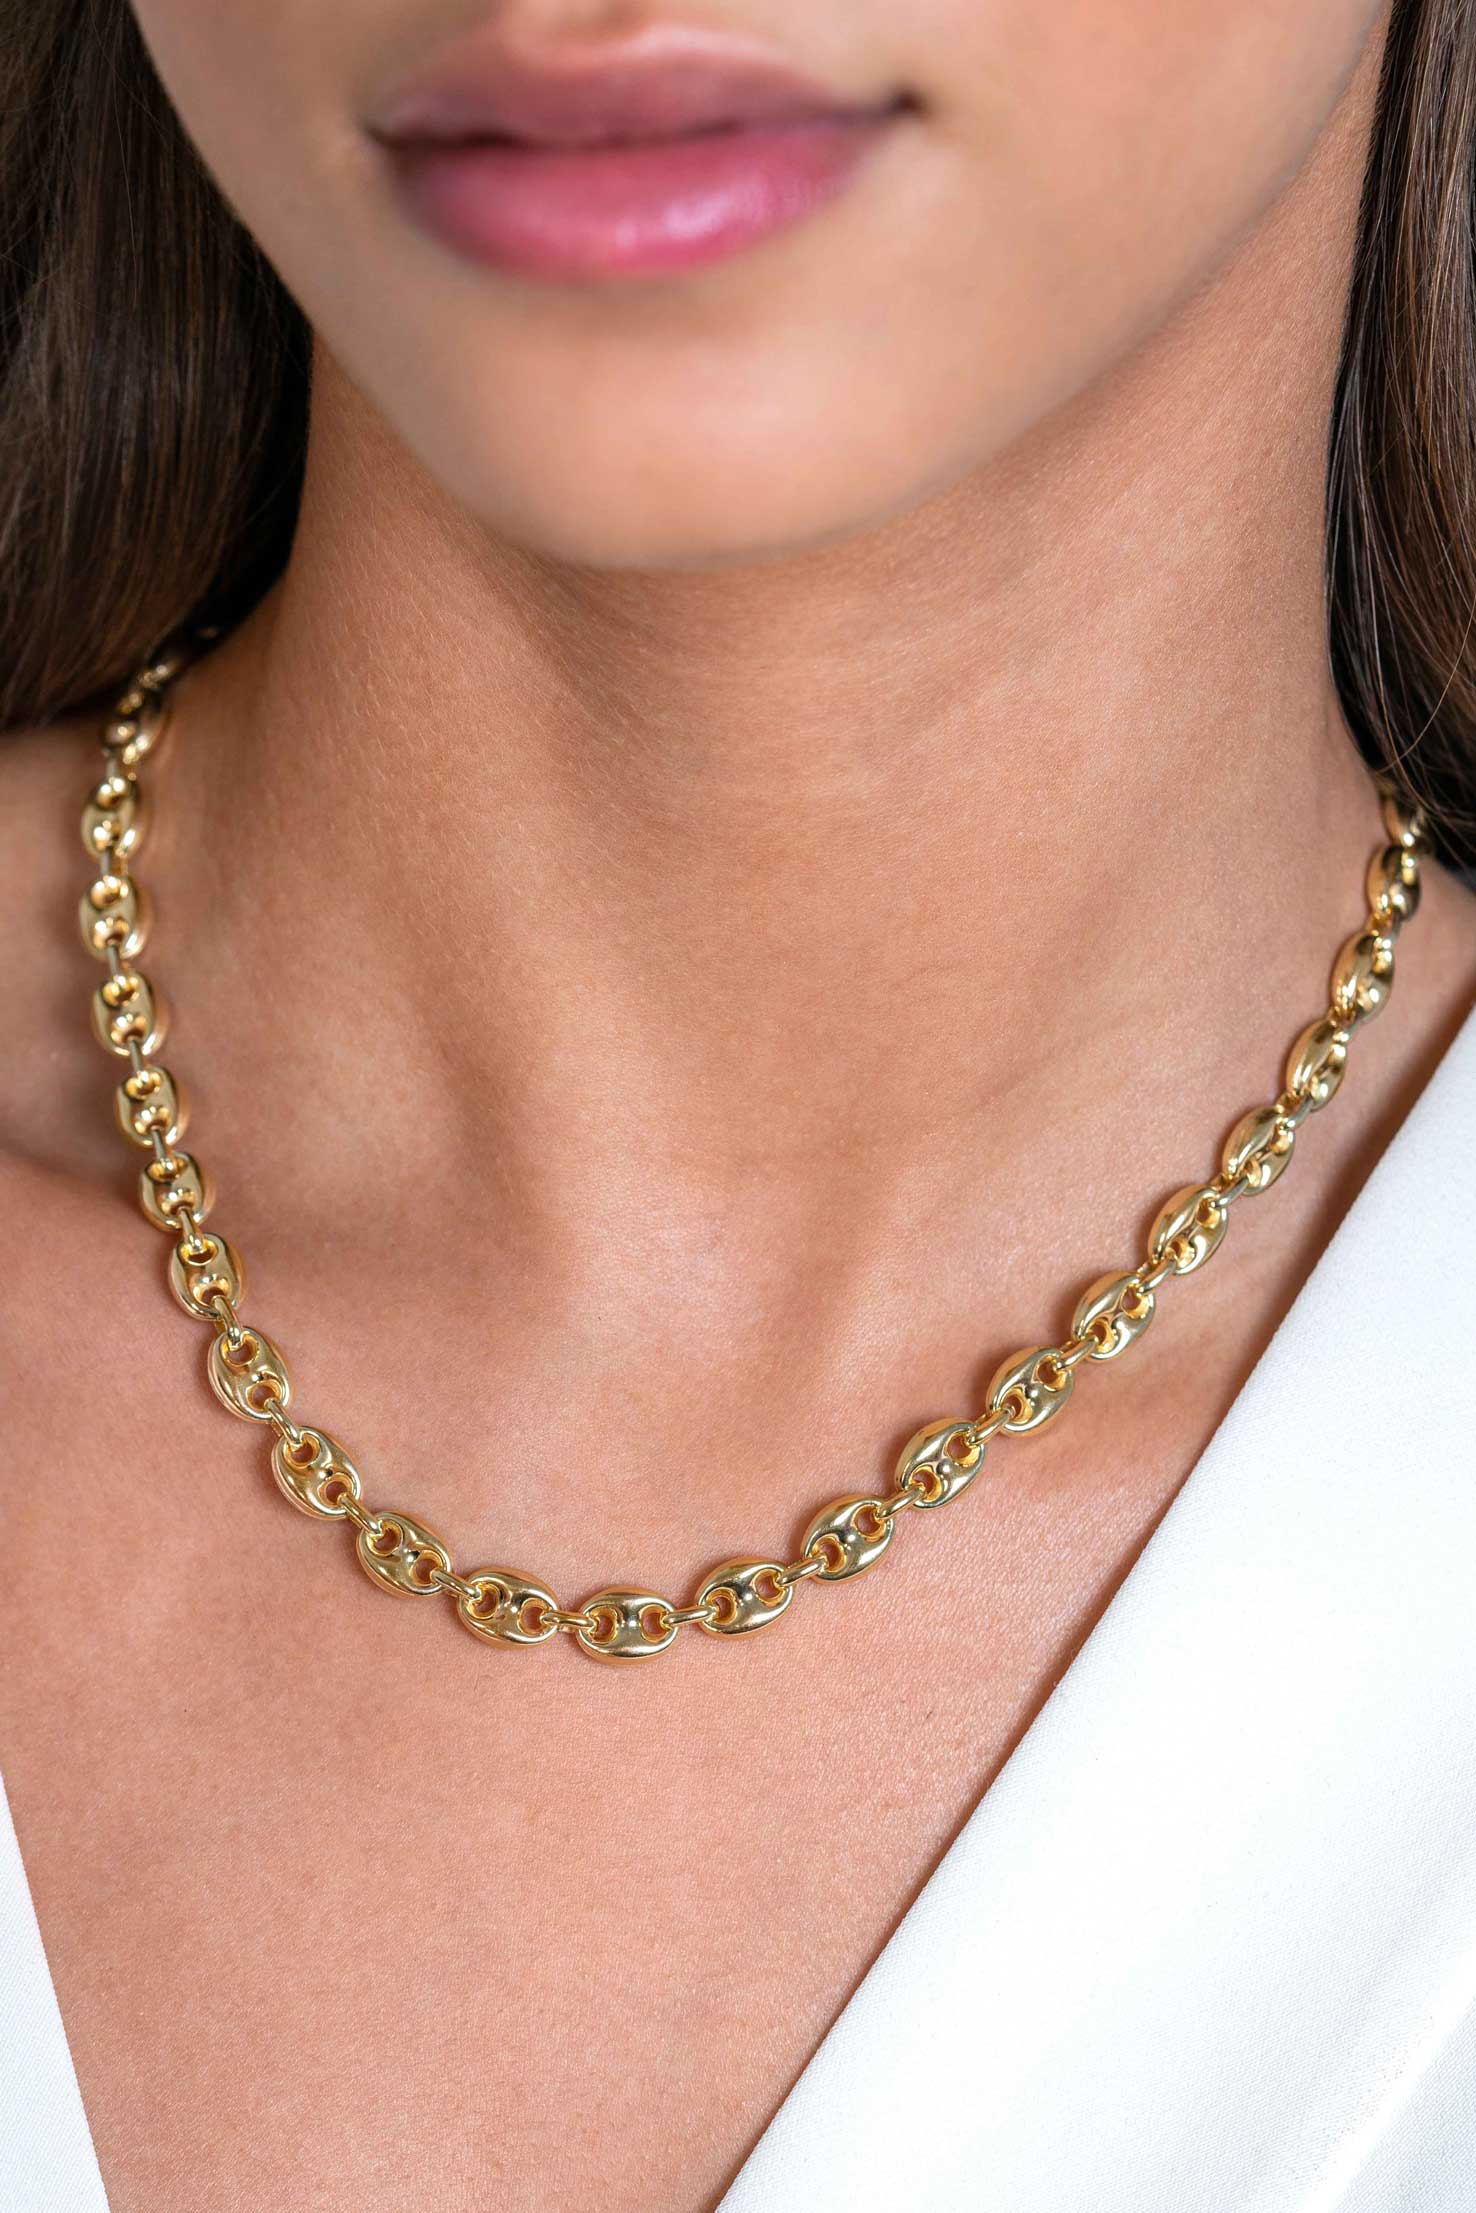 ZINZI Gold Plated Sterling Silver Coffee Bean Chain Necklace 45cm 8mm width ZIC2341G